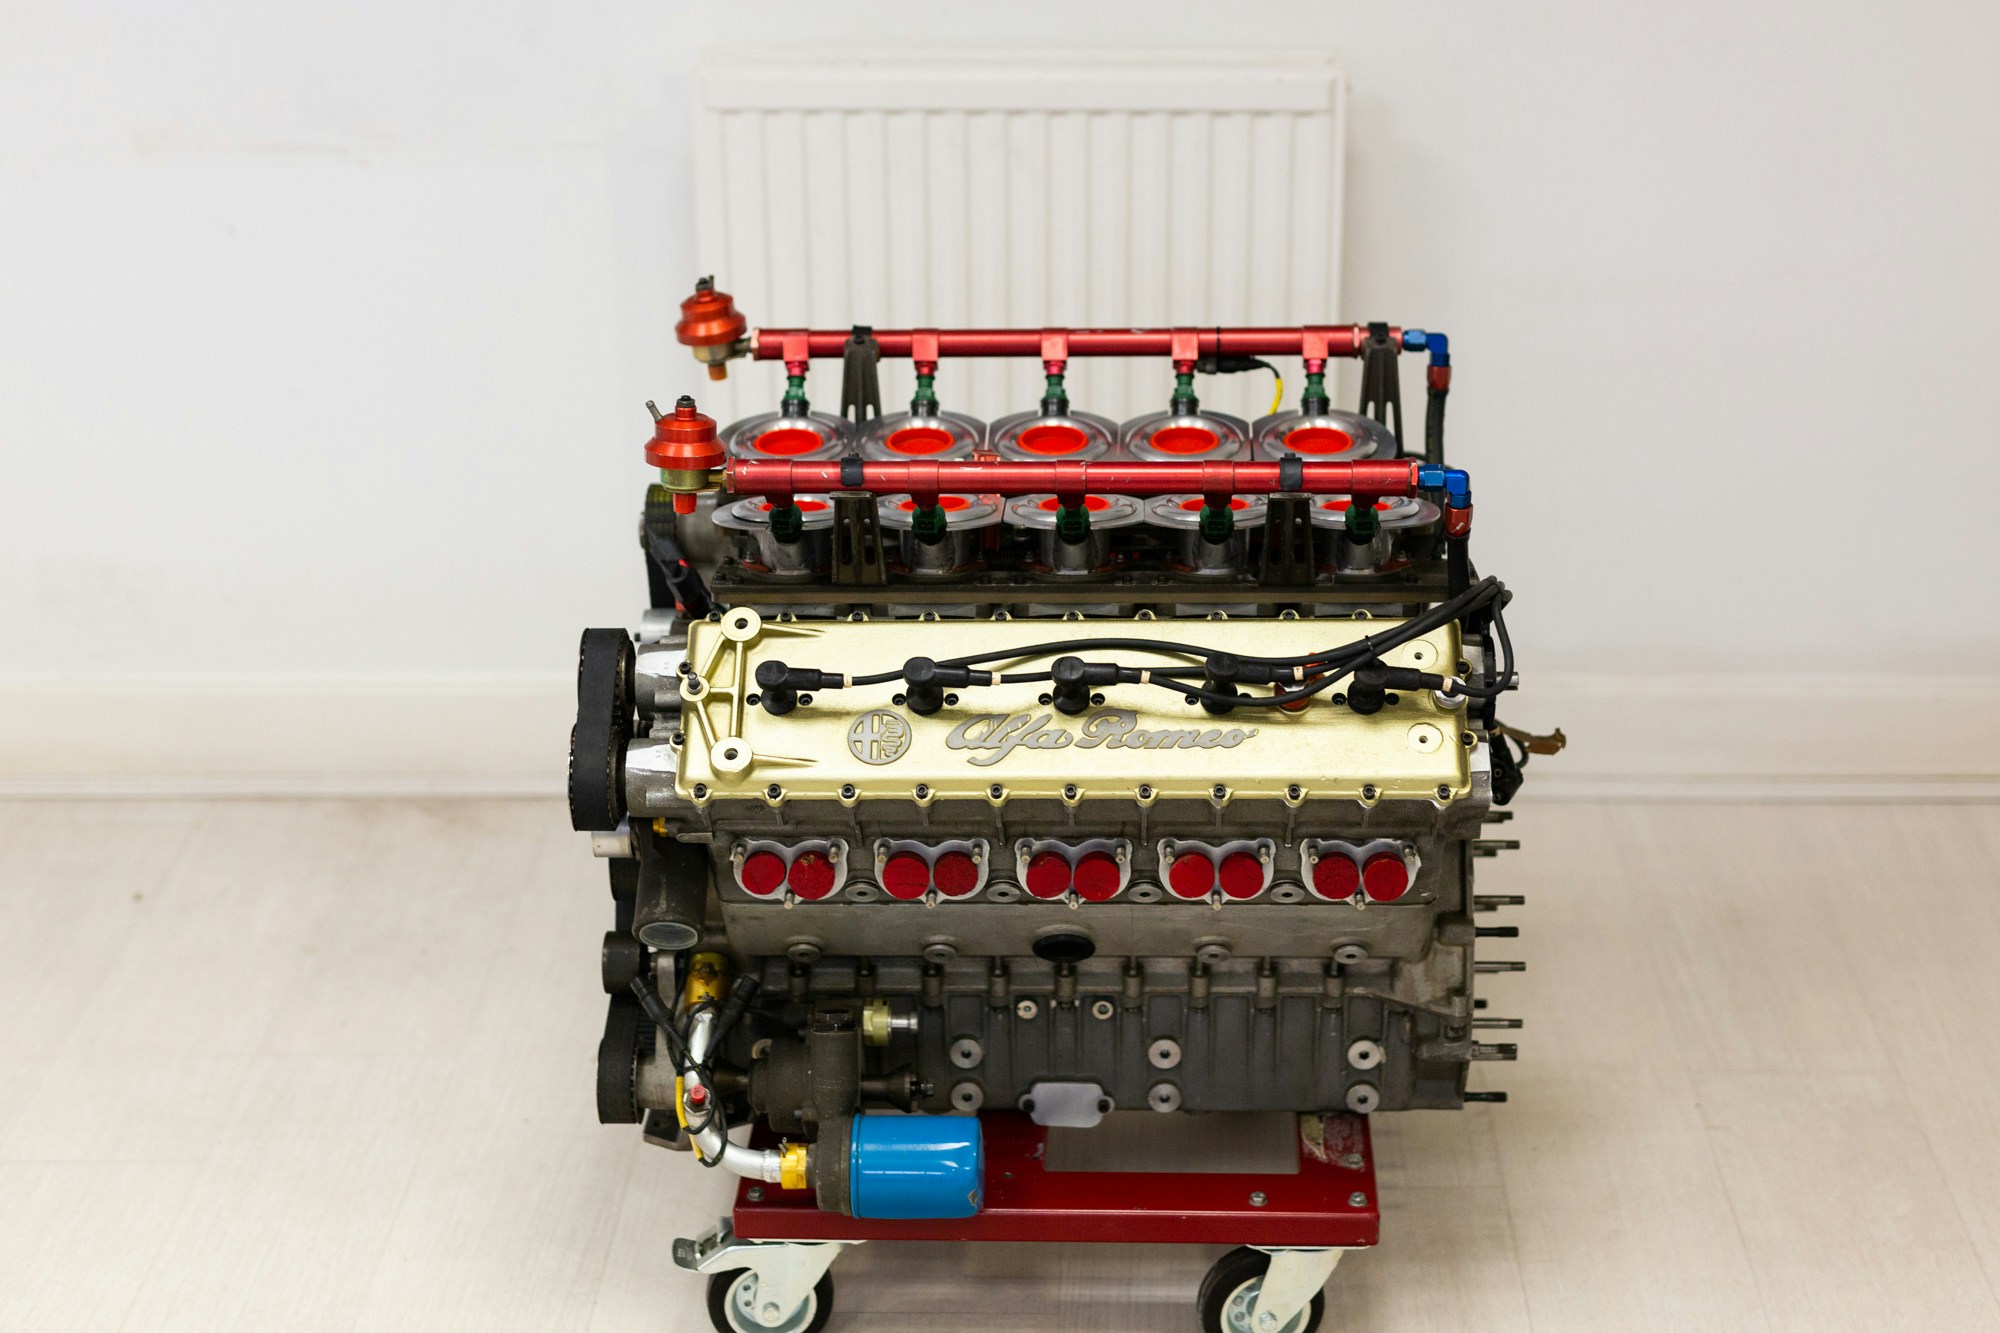 ALFA ROMEO V10 F1 ENGINE for sale by auction in Bramham, Wetherby